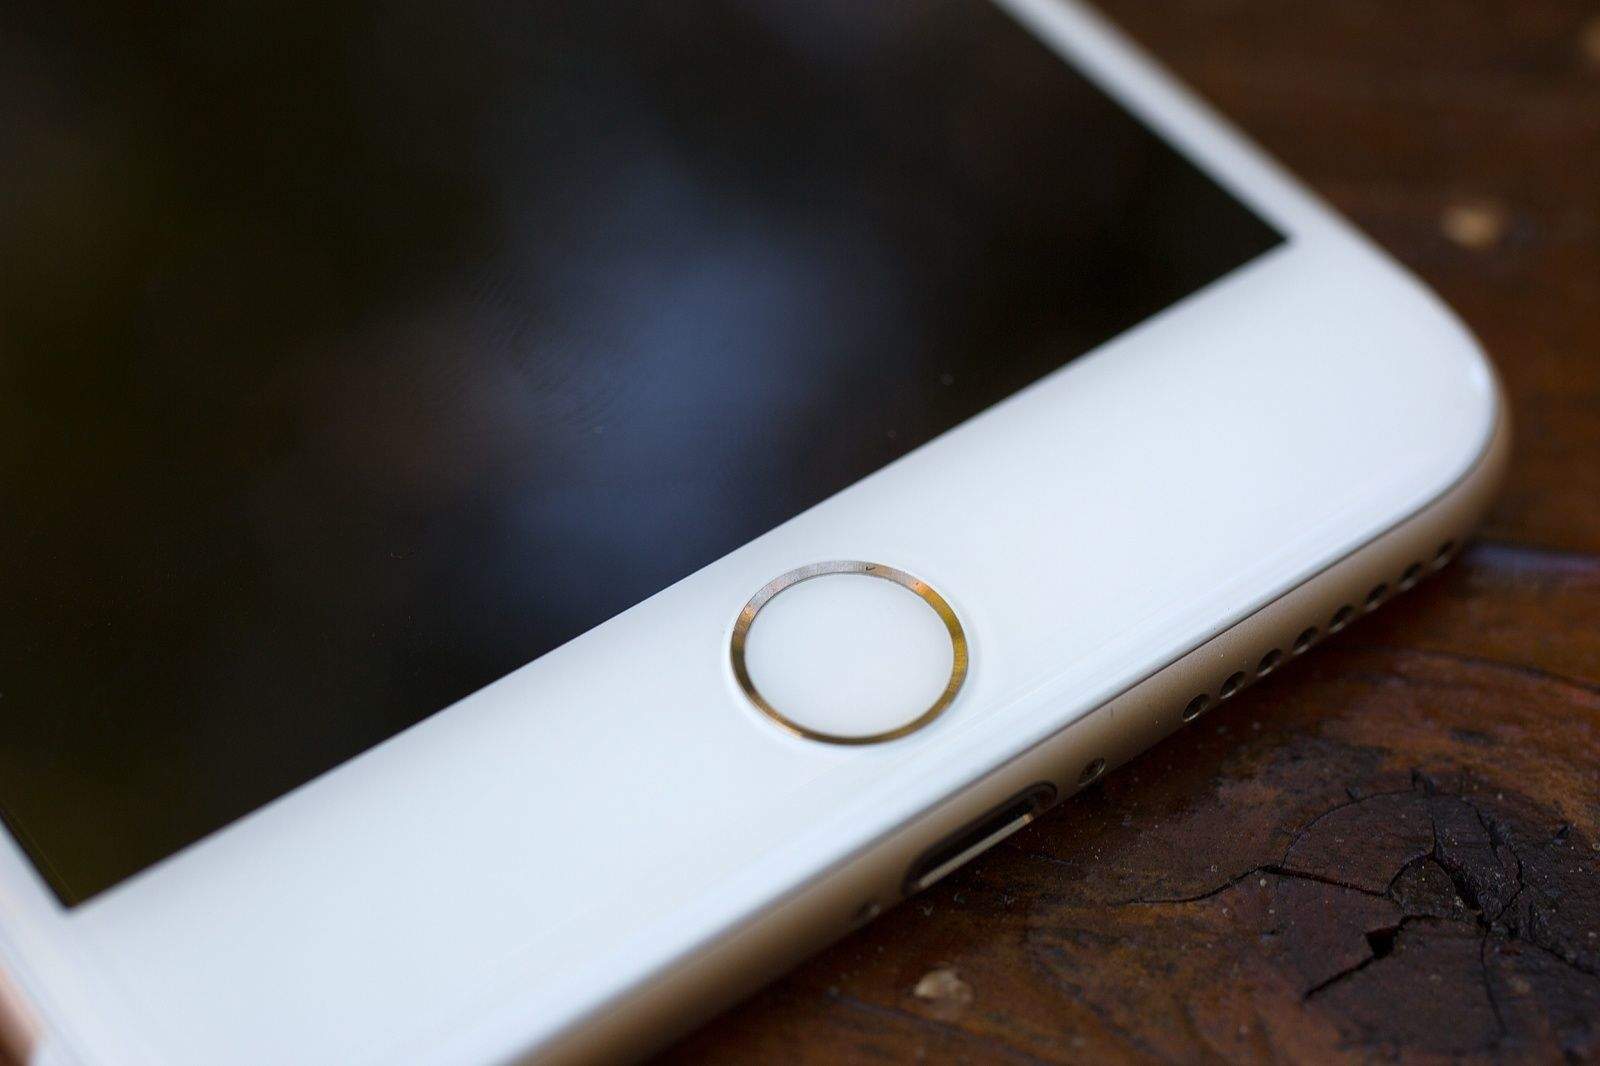 The iPhone 6's Touch ID sensor is greatly improved over the 5s &mdash for me, anyway.